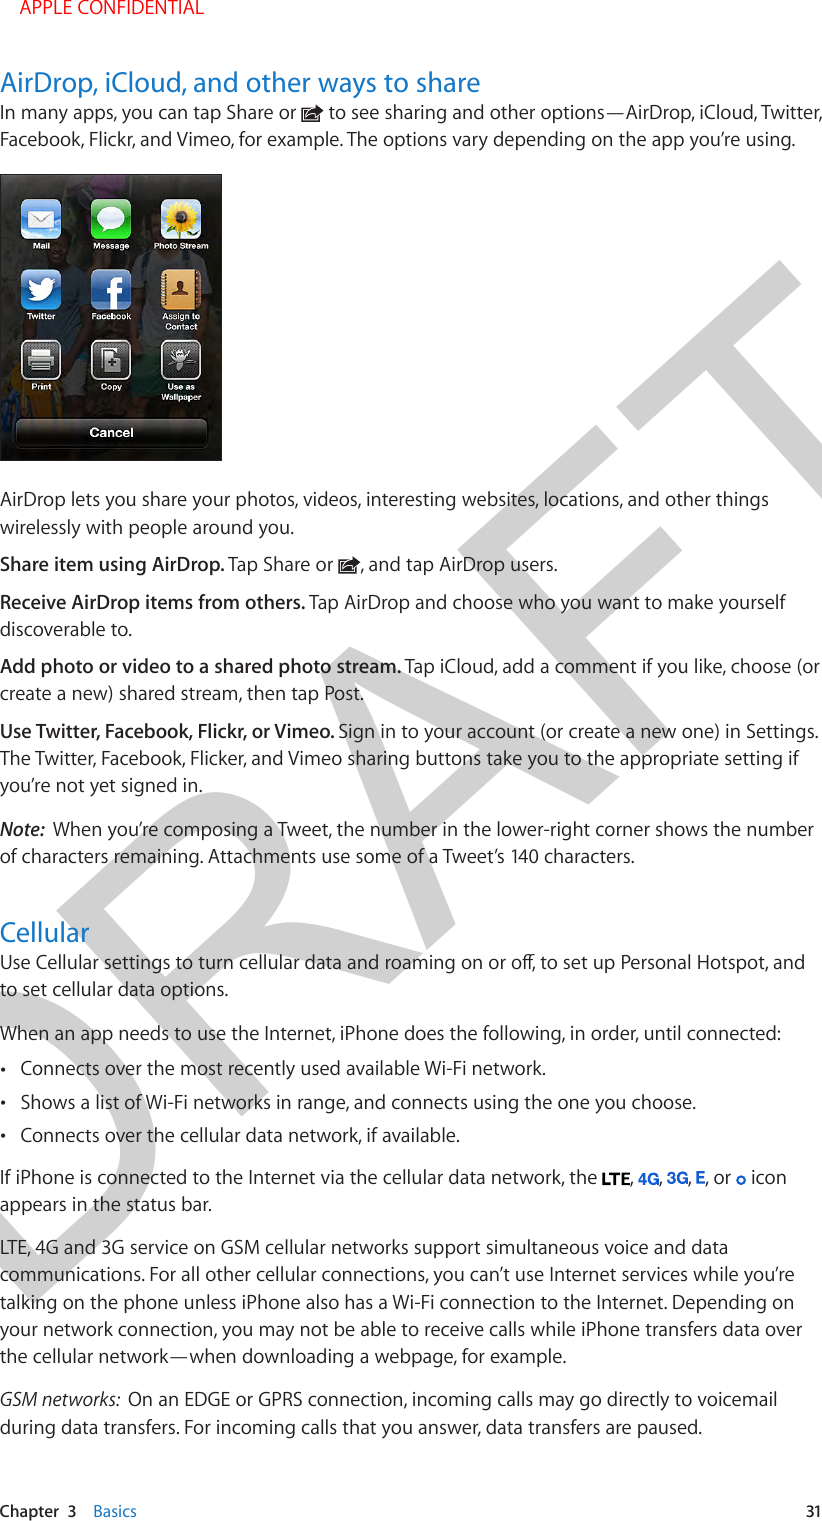 DRAFTChapter  3    Basics  31AirDrop, iCloud, and other ways to shareIn many apps, you can tap Share or   to see sharing and other options—AirDrop, iCloud, Twitter, Facebook, Flickr, and Vimeo, for example. The options vary depending on the app you’re using.AirDrop lets you share your photos, videos, interesting websites, locations, and other things wirelessly with people around you. Share item using AirDrop. Tap Share or  , and tap AirDrop users.Receive AirDrop items from others. Tap AirDrop and choose who you want to make yourself discoverable to.Add photo or video to a shared photo stream. Tap iCloud, add a comment if you like, choose (or create a new) shared stream, then tap Post.Use Twitter, Facebook, Flickr, or Vimeo. Sign in to your account (or create a new one) in Settings. The Twitter, Facebook, Flicker, and Vimeo sharing buttons take you to the appropriate setting if you’re not yet signed in.Note:  When you’re composing a Tweet, the number in the lower-right corner shows the number of characters remaining. Attachments use some of a Tweet’s 140 characters.Cellularto set cellular data options.When an app needs to use the Internet, iPhone does the following, in order, until connected: •Connects over the most recently used available Wi-Fi network. •Shows a list of Wi-Fi networks in range, and connects using the one you choose. •Connects over the cellular data network, if available.If iPhone is connected to the Internet via the cellular data network, the  ,  ,  ,  , or   icon appears in the status bar.LTE, 4G and 3G service on GSM cellular networks support simultaneous voice and data communications. For all other cellular connections, you can’t use Internet services while you’re talking on the phone unless iPhone also has a Wi-Fi connection to the Internet. Depending on your network connection, you may not be able to receive calls while iPhone transfers data over the cellular network—when downloading a webpage, for example.GSM networks:  On an EDGE or GPRS connection, incoming calls may go directly to voicemail during data transfers. For incoming calls that you answer, data transfers are paused.    APPLE CONFIDENTIAL